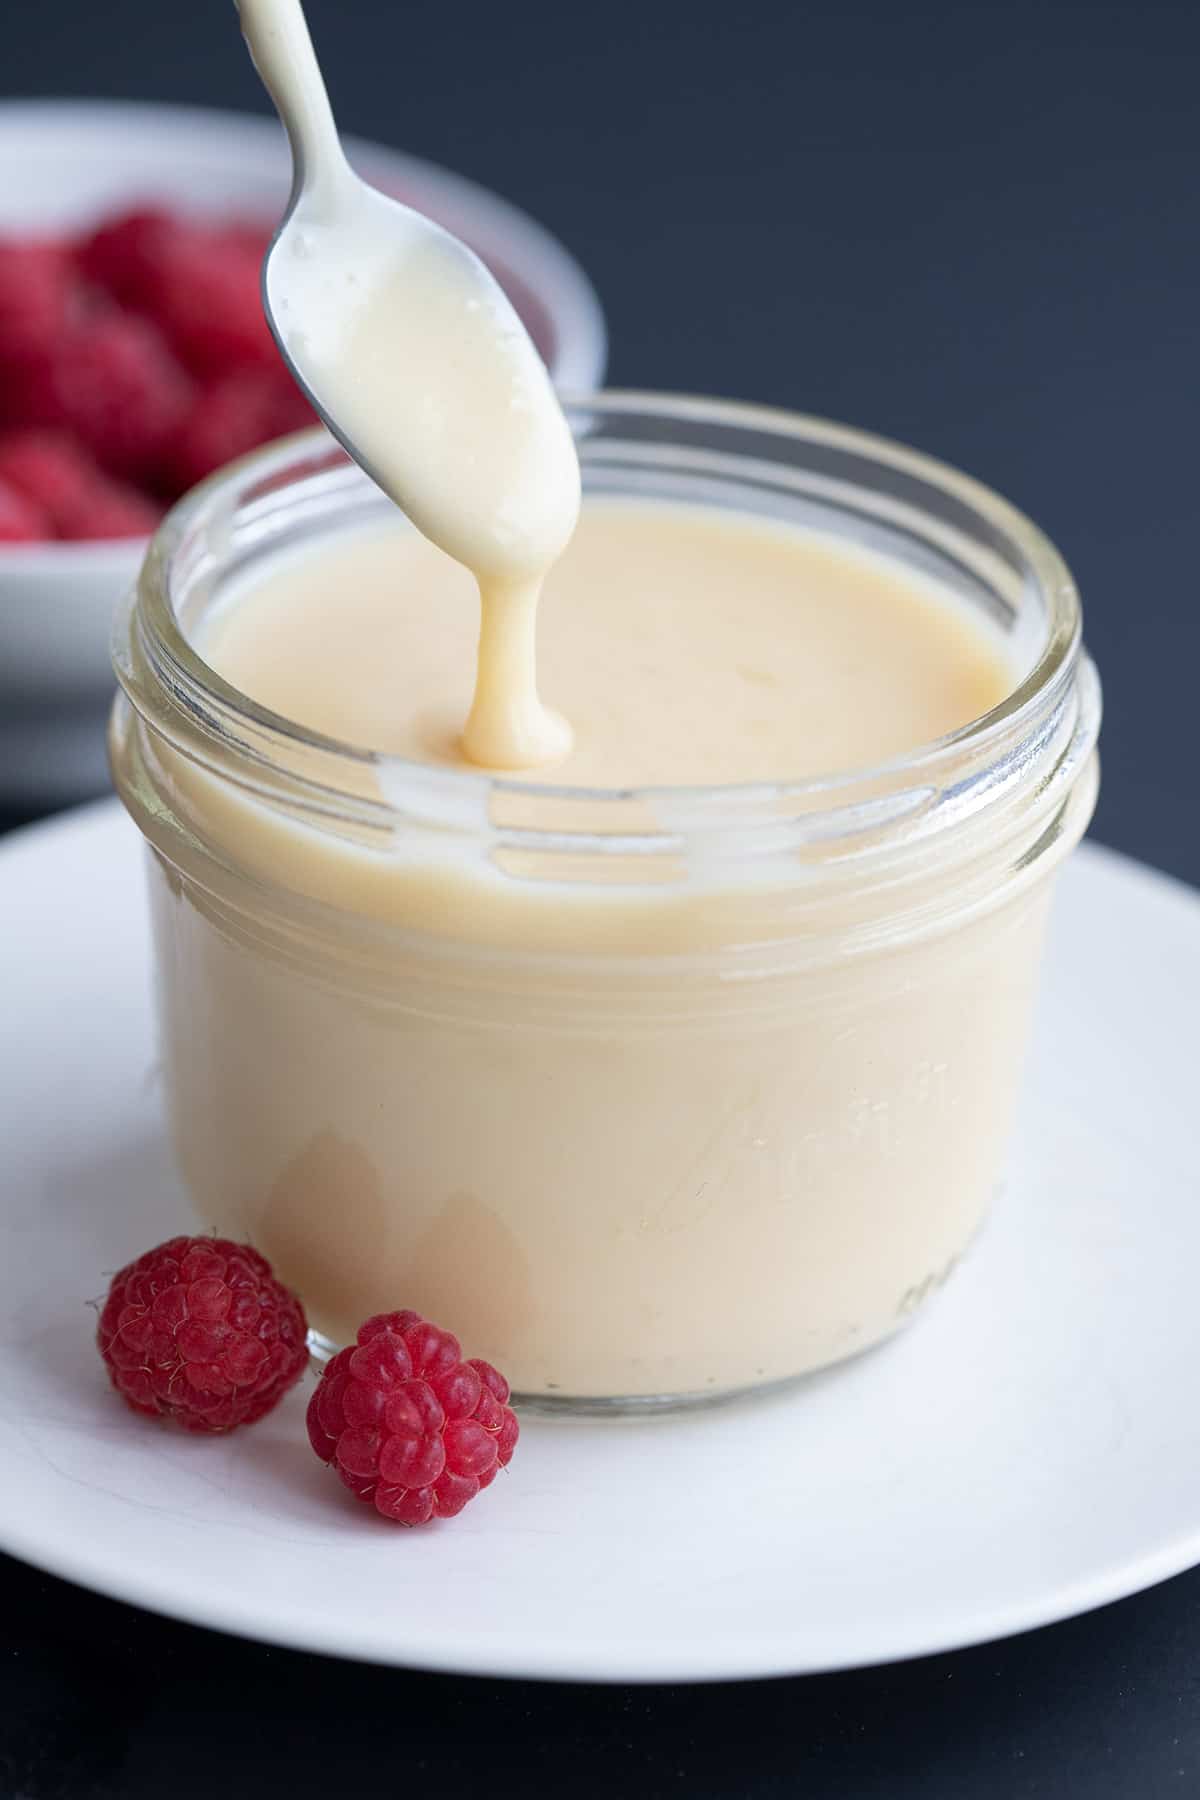 A jar of Keto Condensed Milk on a white plate with raspberries around it.